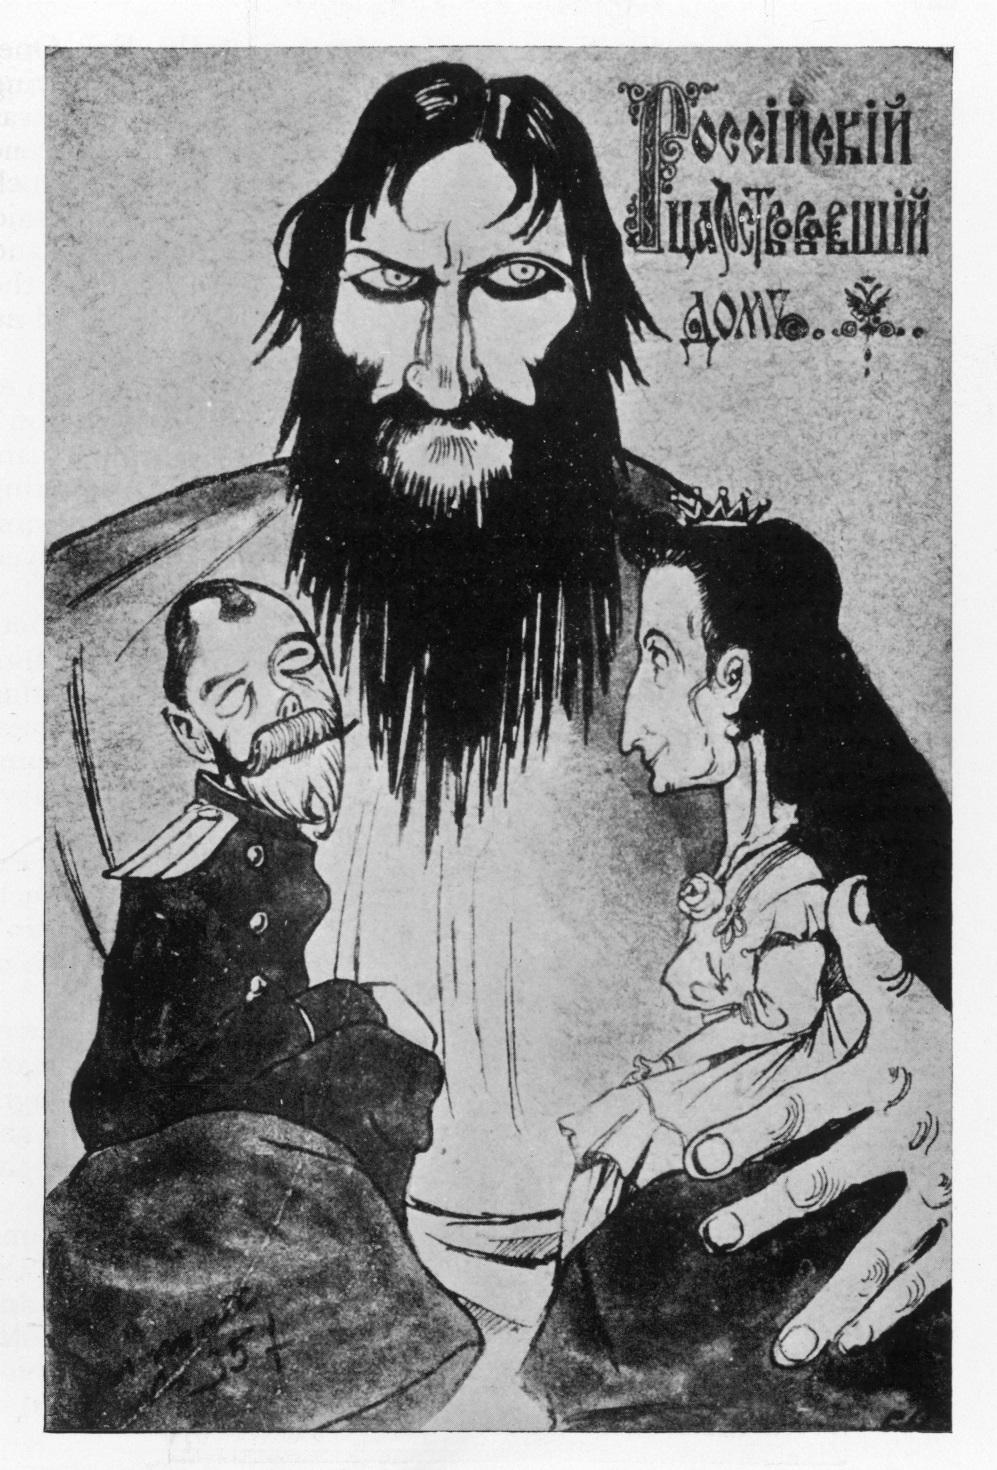 3 0 3 Study Source B. Source B The Russian Tsars at home A popular and widely seen Russian cartoon showing Rasputin as a father figure with the Tsar and Tsarina as children on his knee.